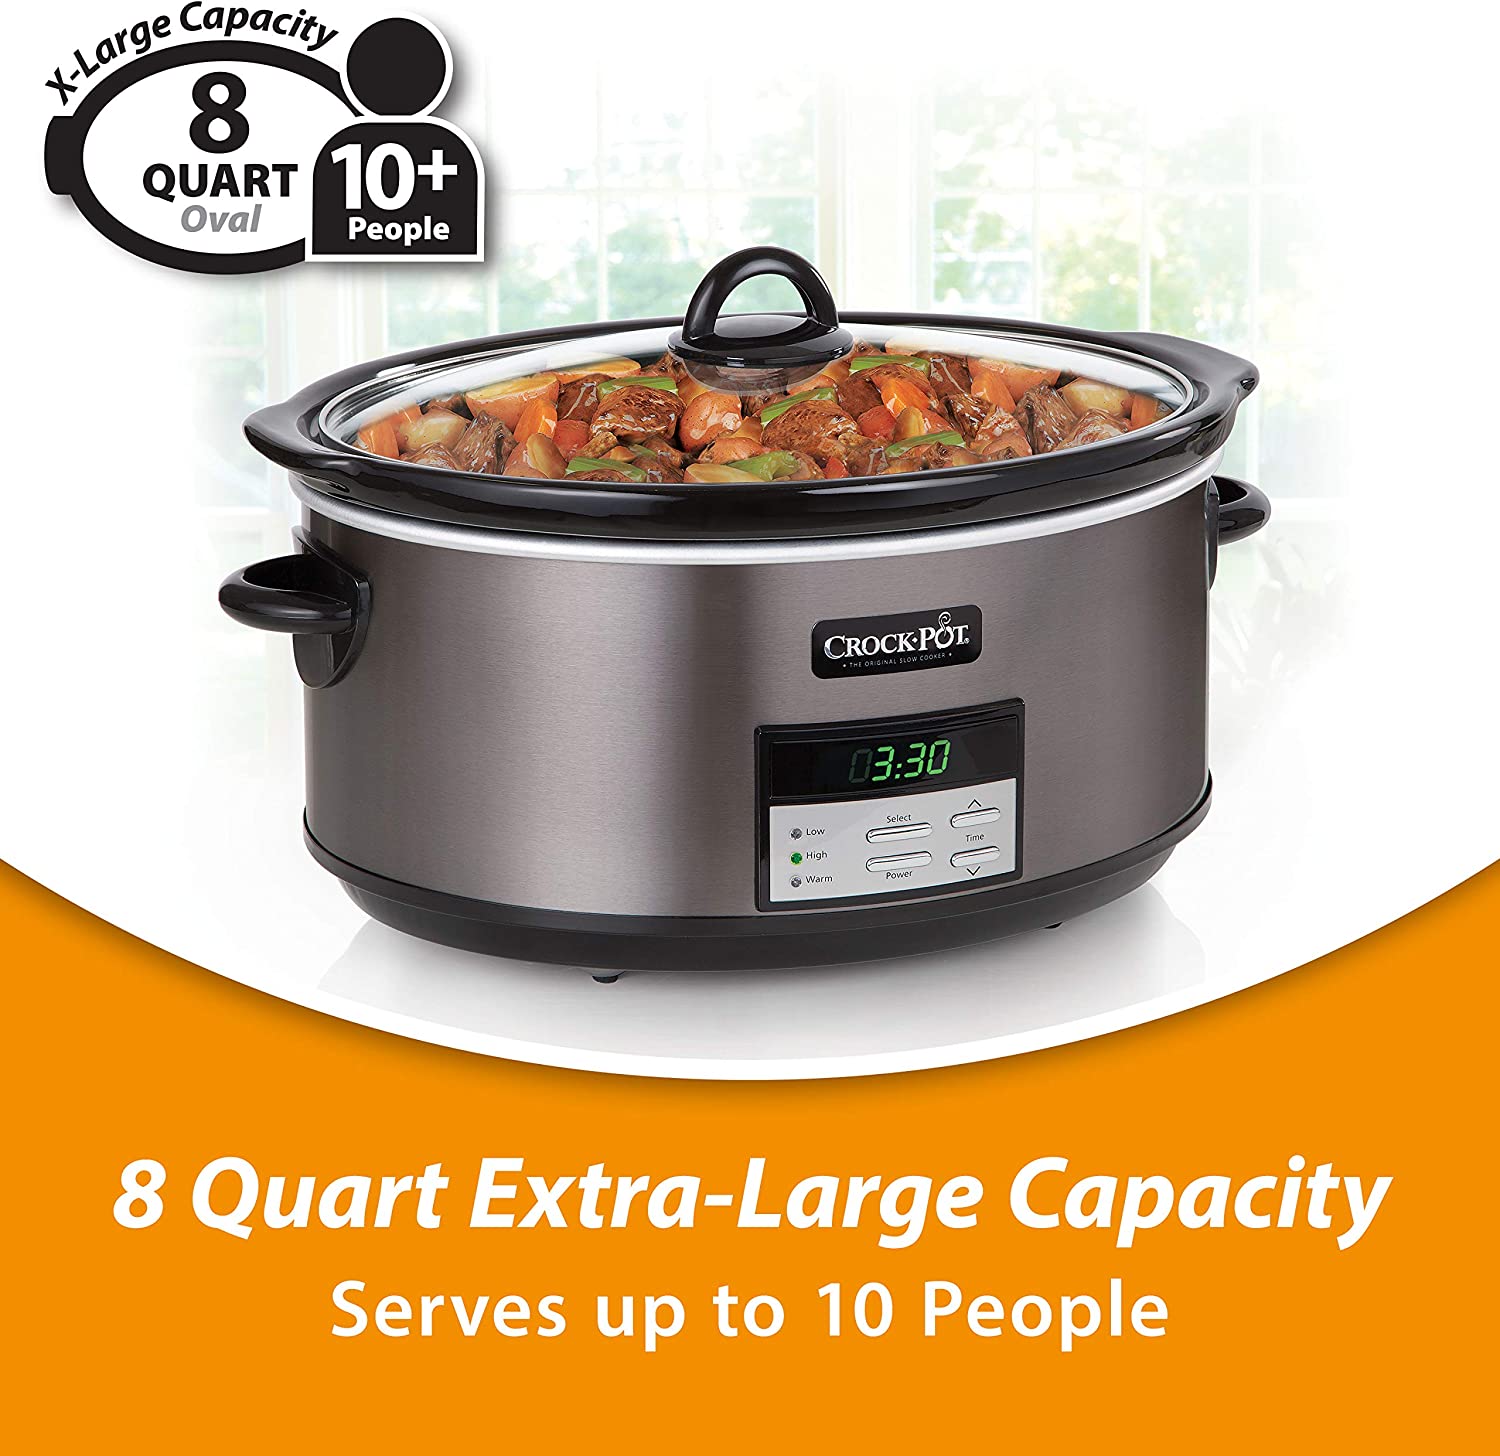 Crock Pot Black Stainless Steel Slow Cookers